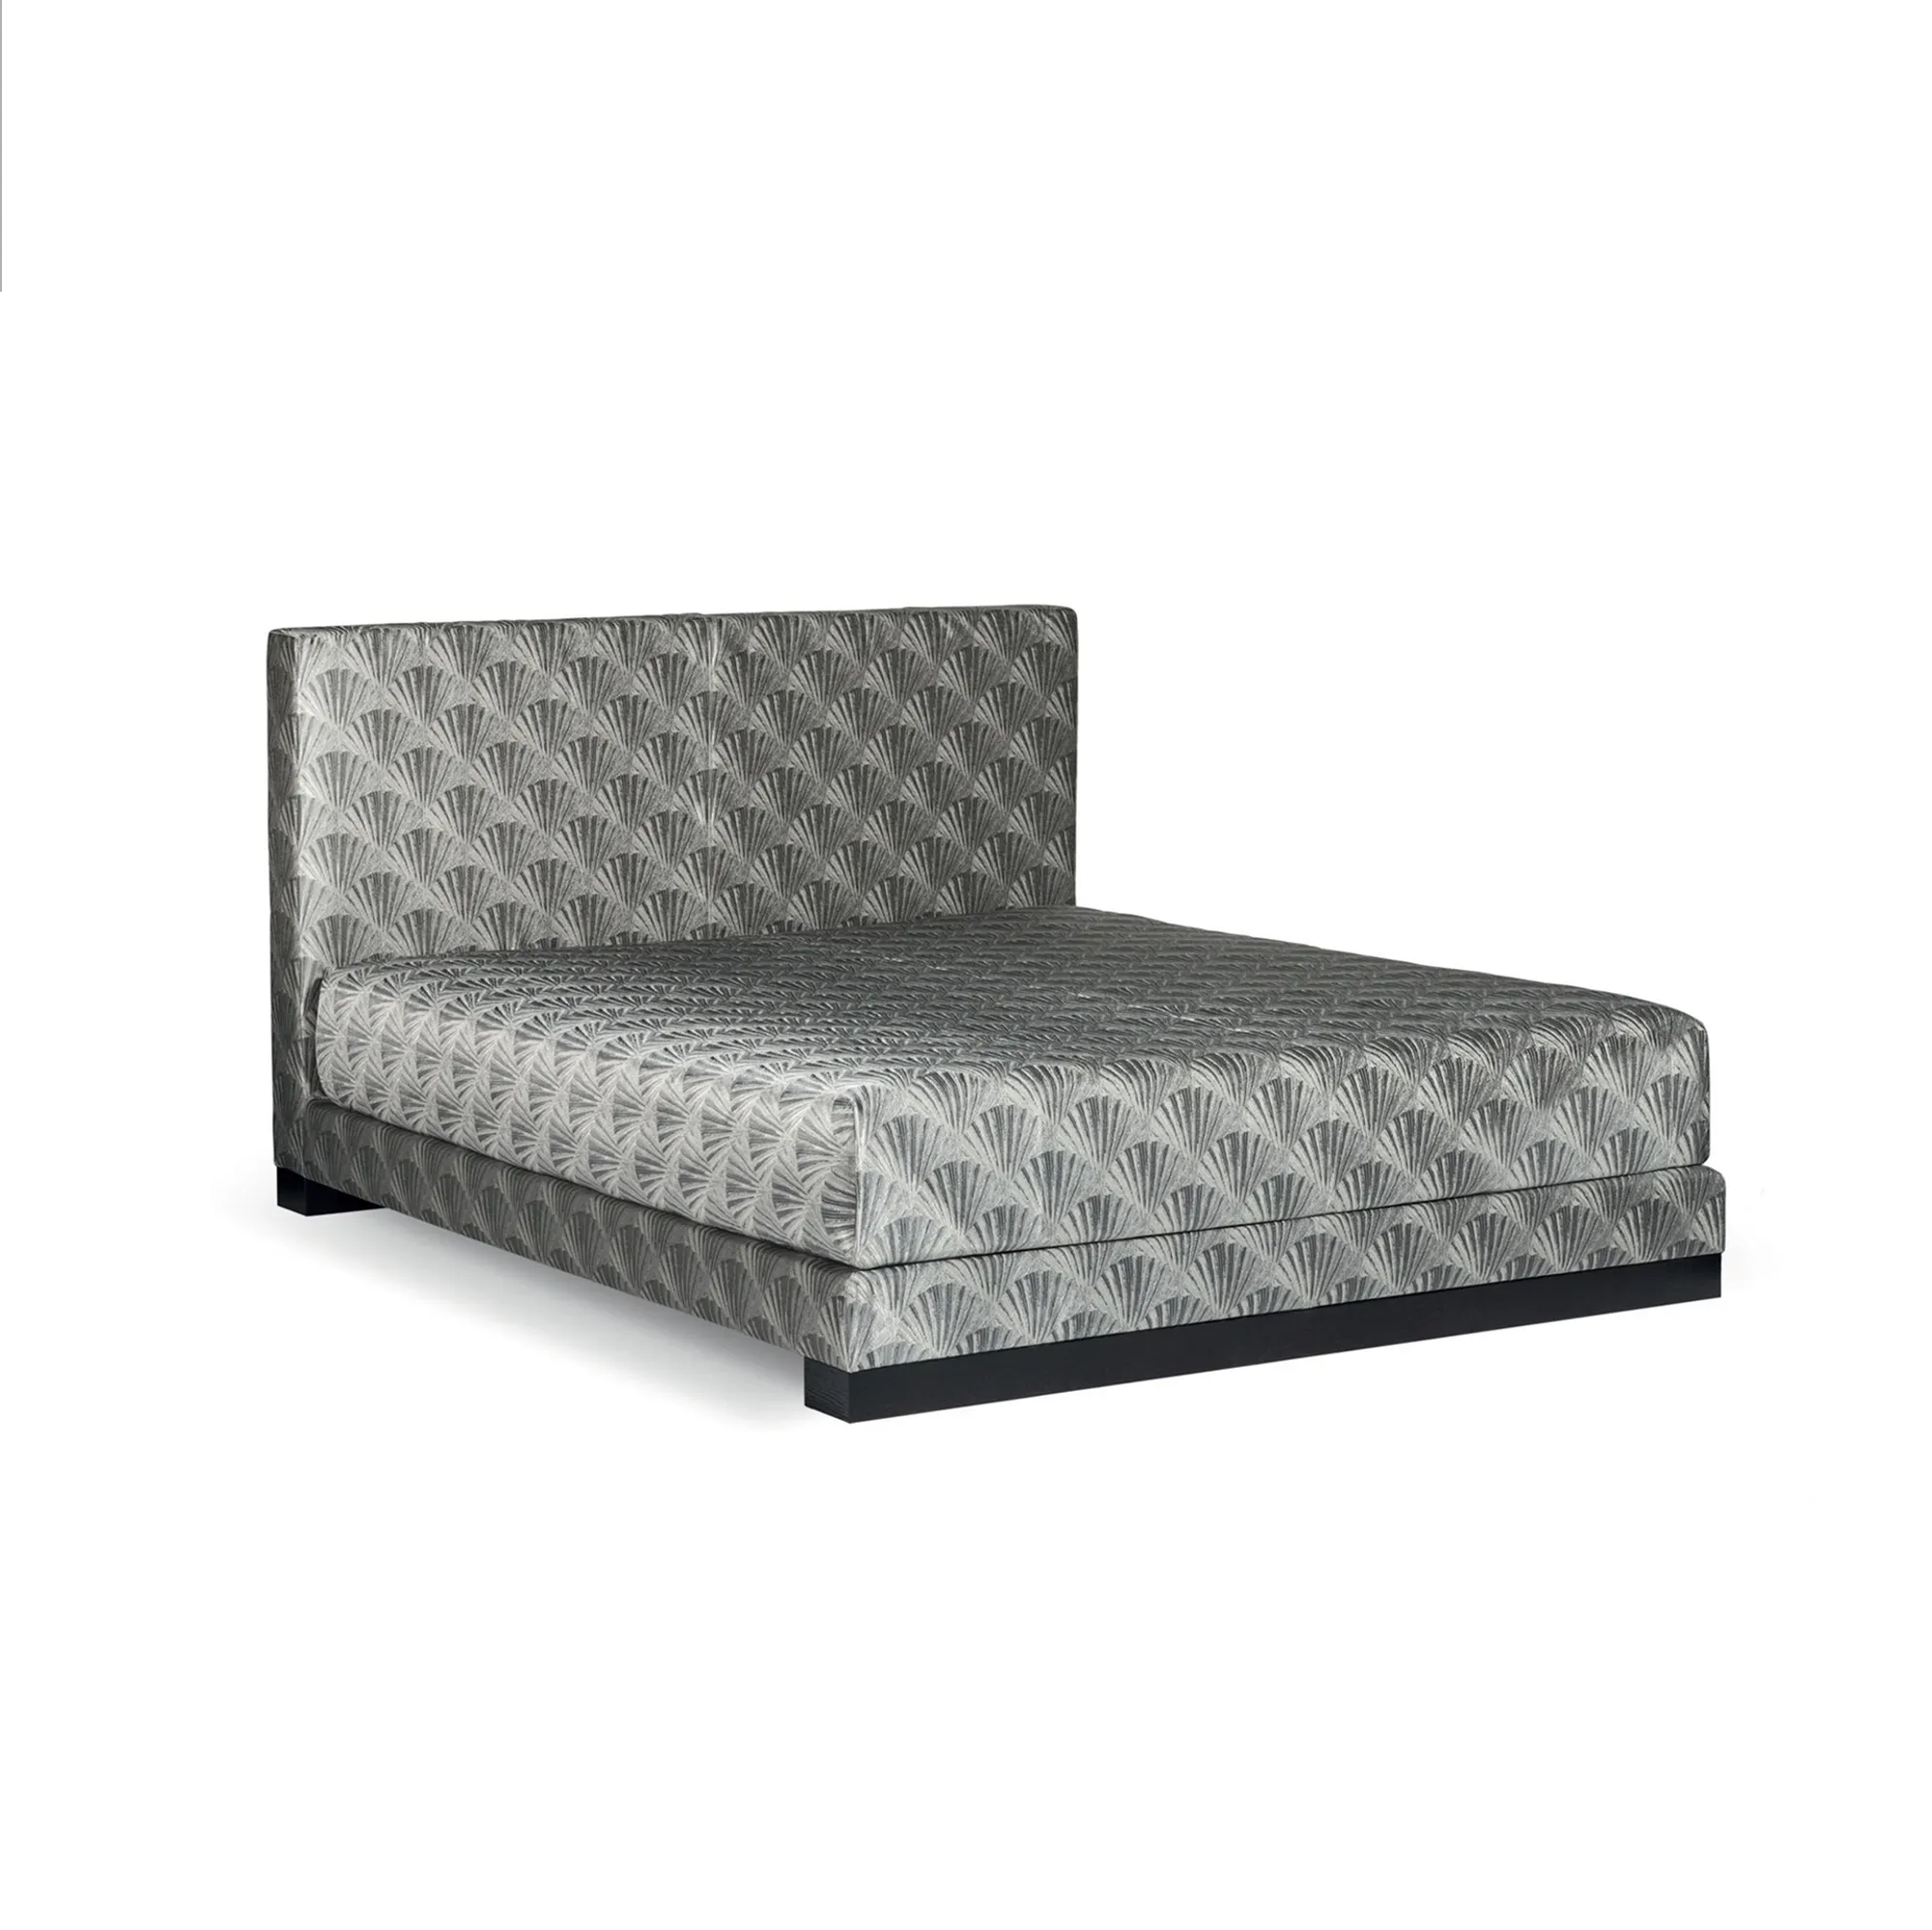 Roma High Bed